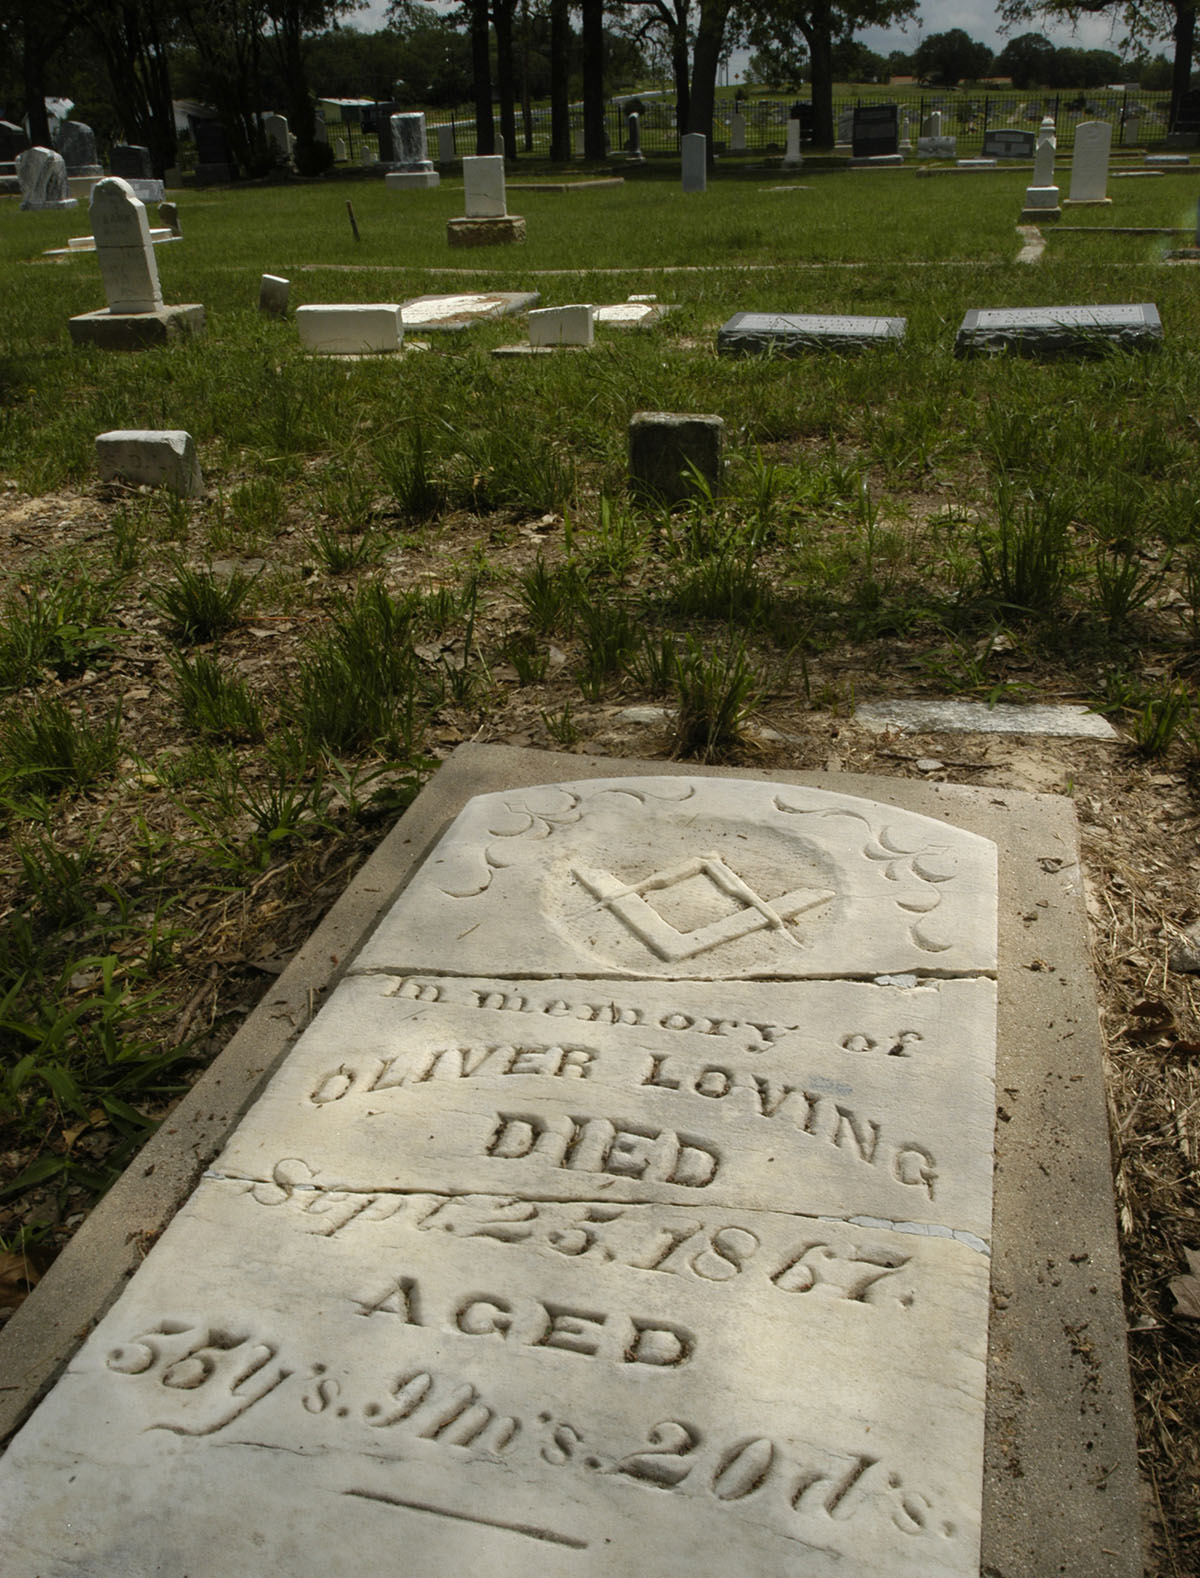 A cement gravestone reading "Oliver Loving Died Sept. 23, 1967" in a green cemetery